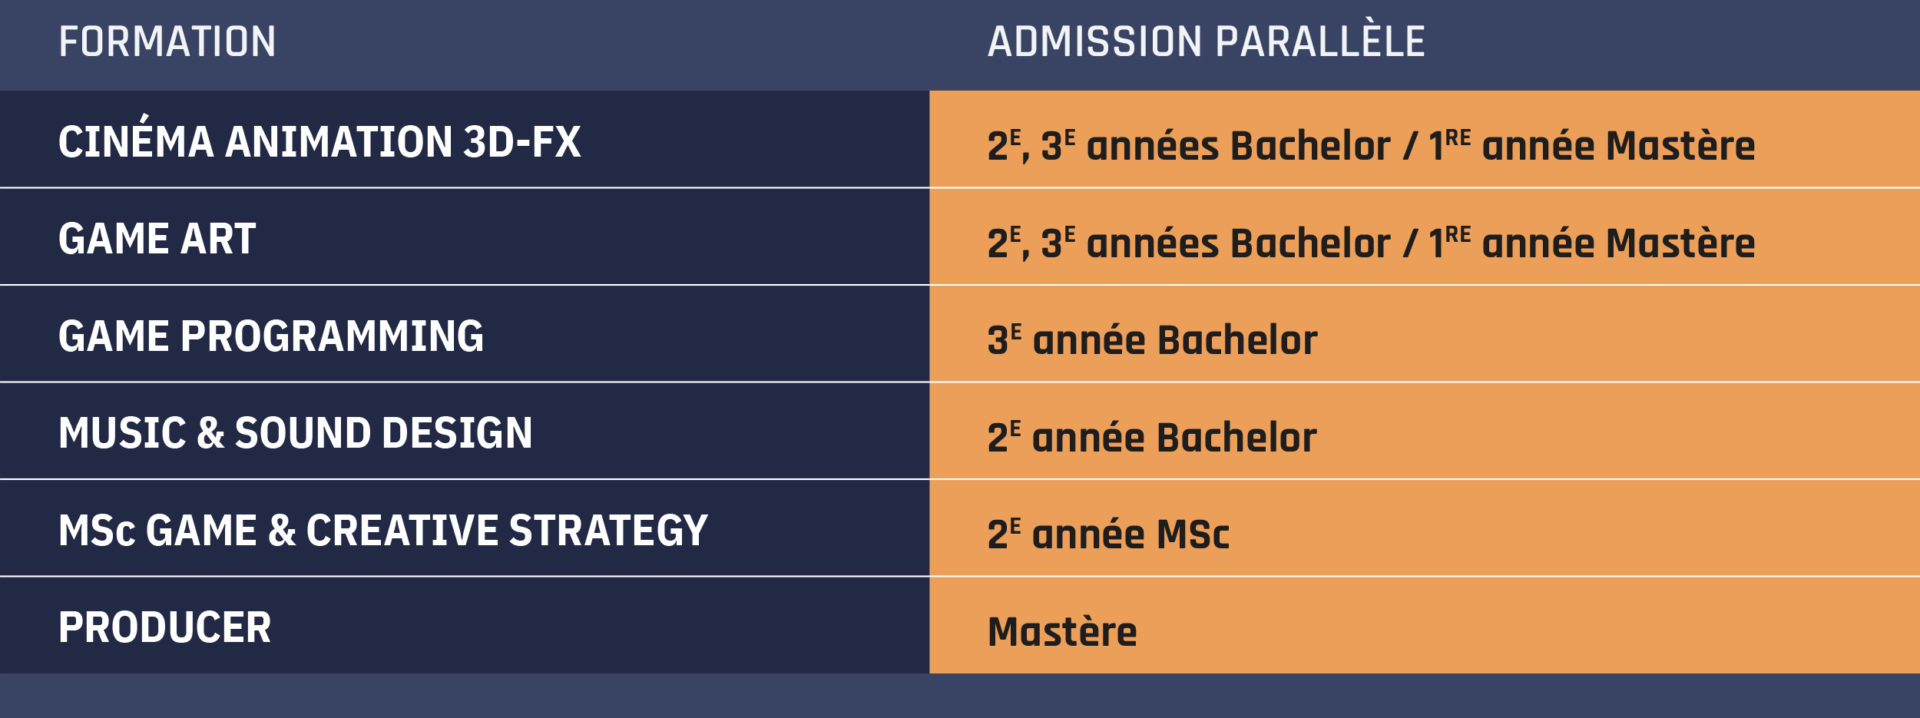 Formation_Admission_parallèle